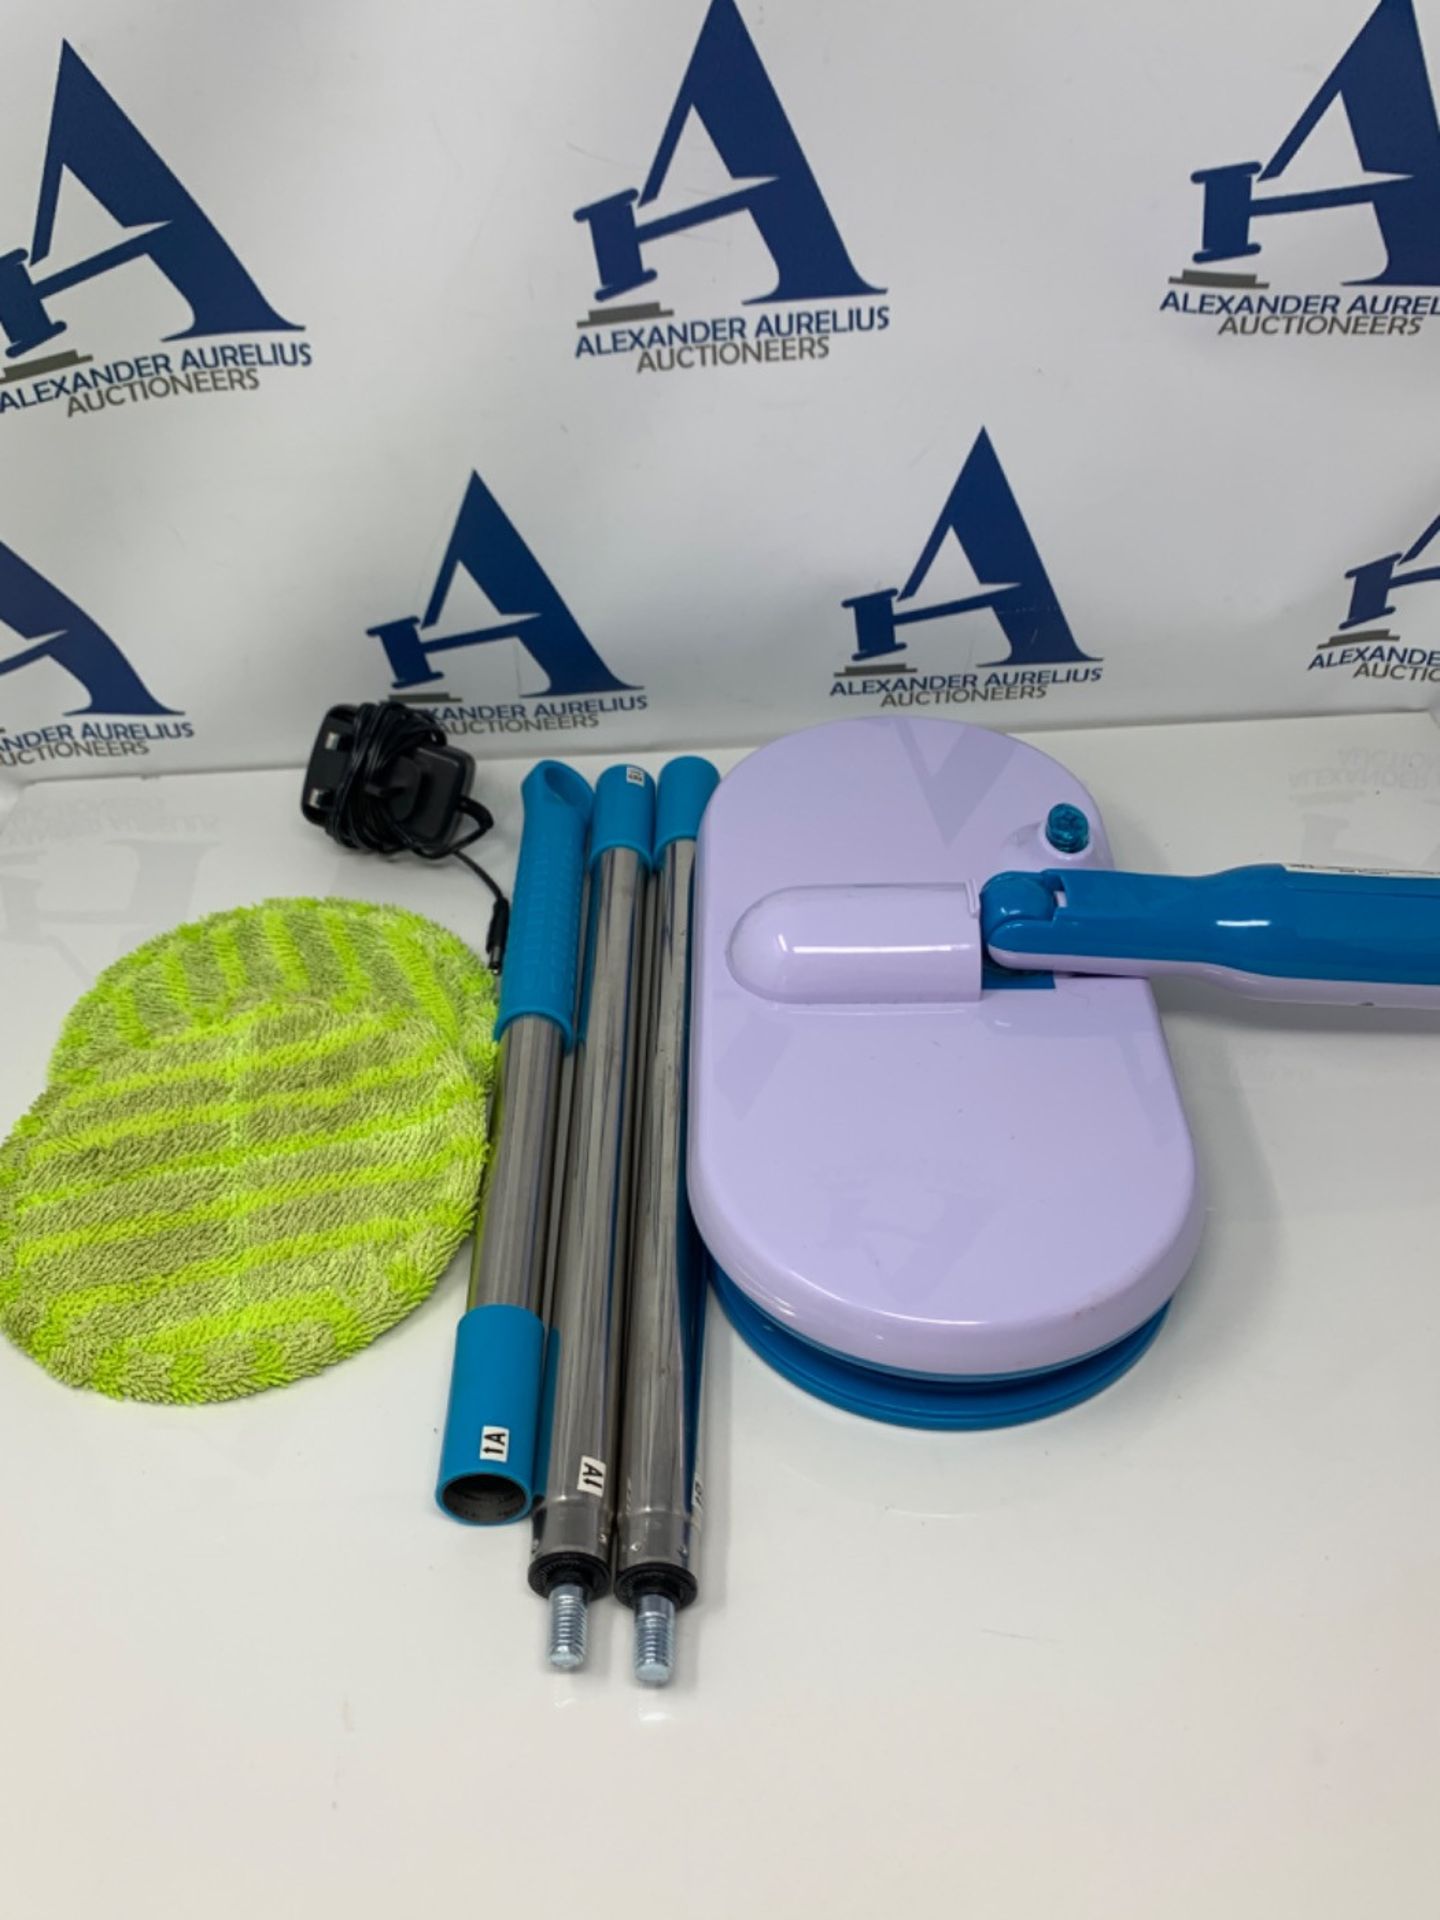 High Street TV Floating Mop - Motorised Cordless & Rechargeable - Spinning Mop - Inclu - Image 2 of 2